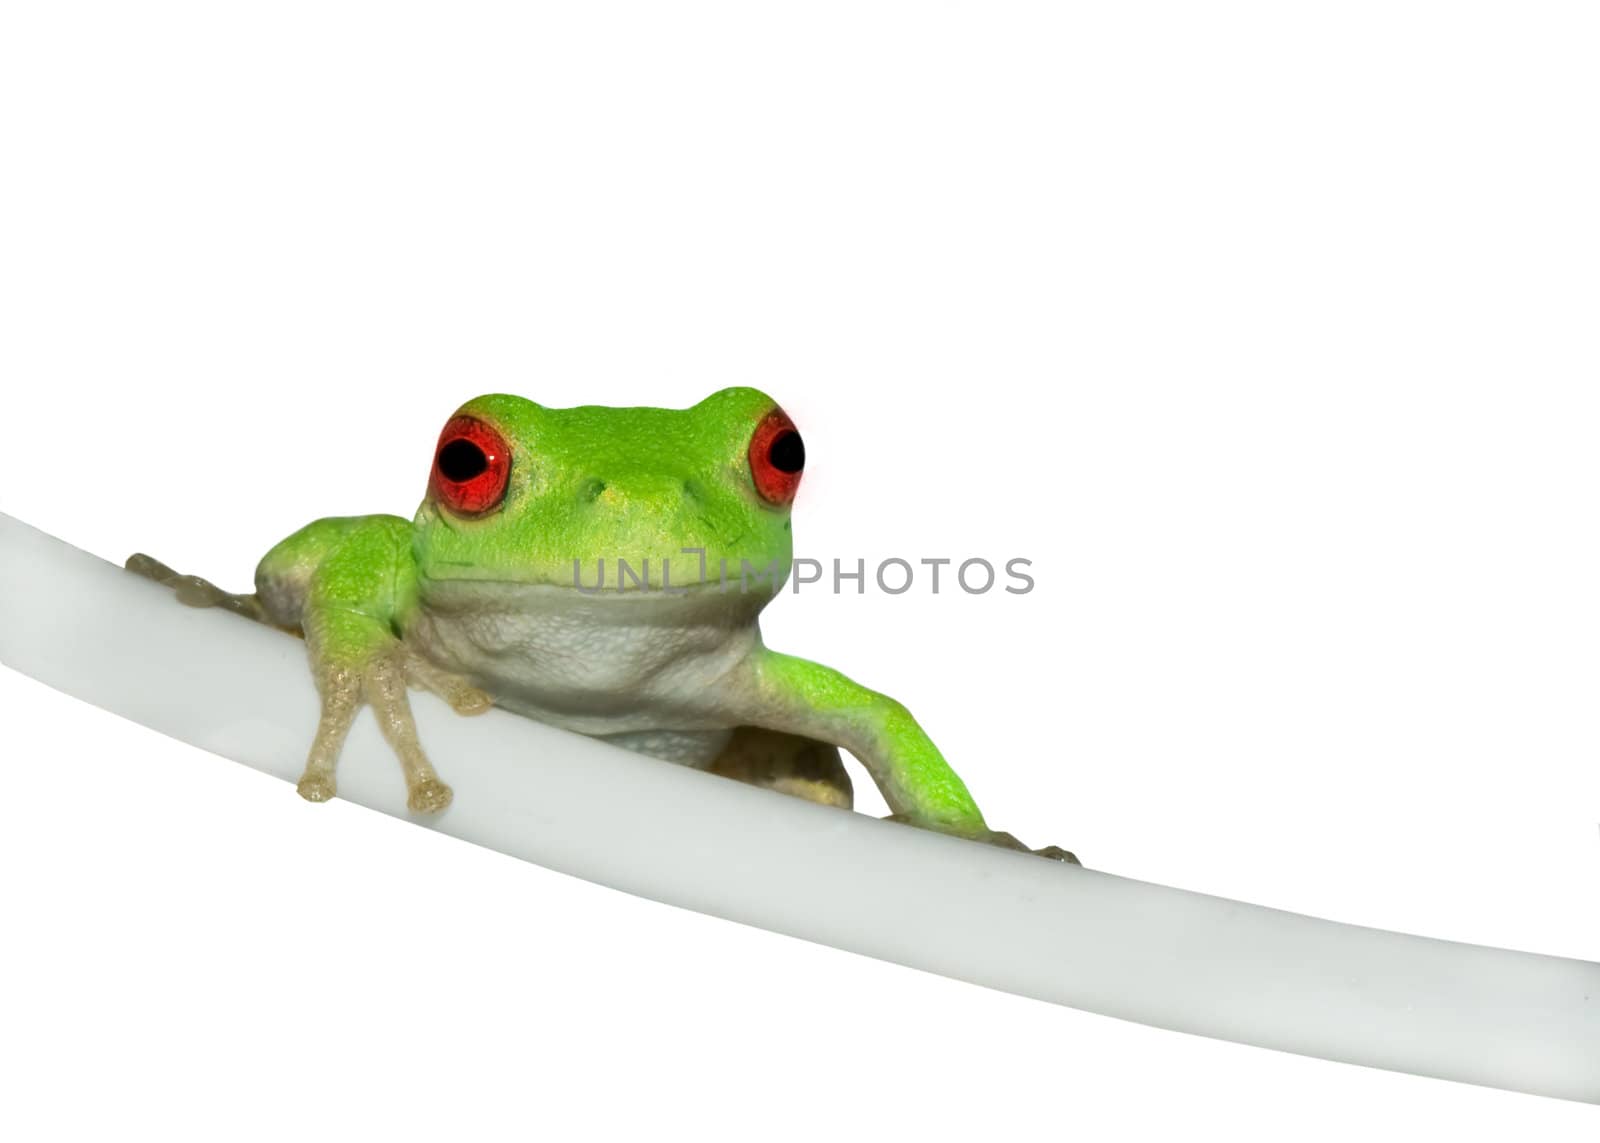 A little frog climbs up the side of an object